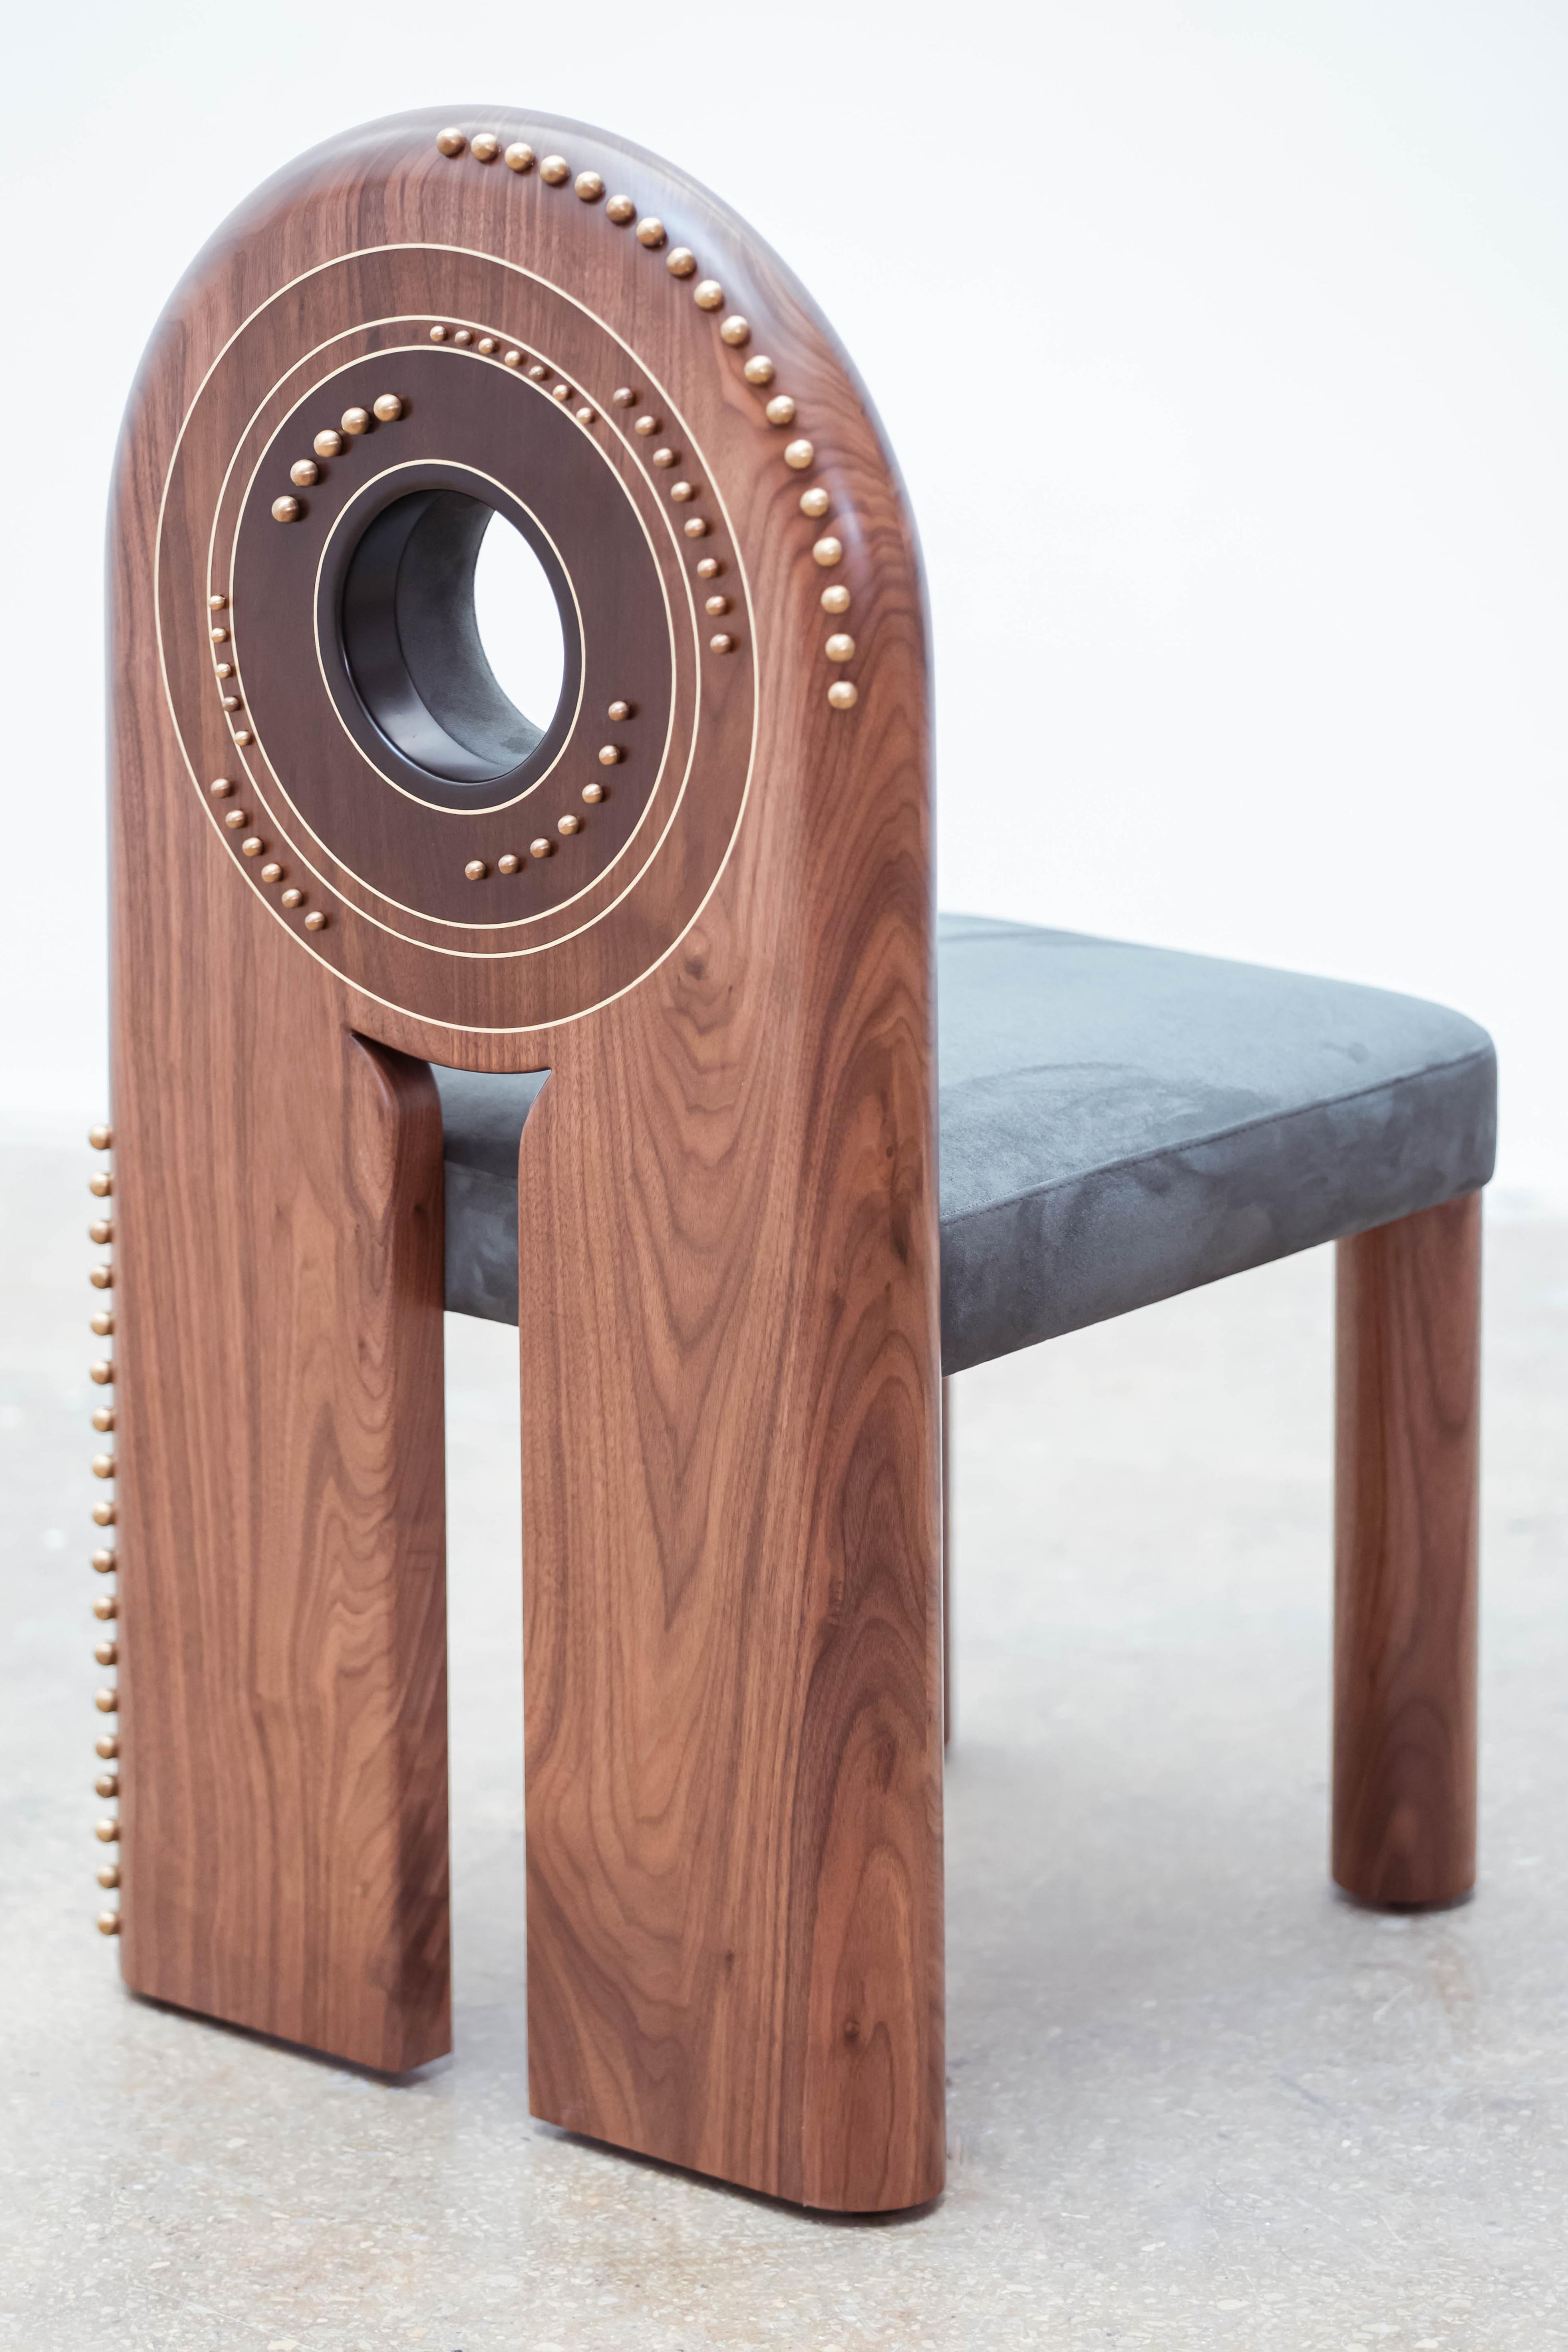 Galaxy Chair II by Eva Szumilas
Dimensions: D 57 x W 51 x H 92 cm.
Materials: Solid walnut wood, cast brass, brass inlays, fabric upholstery.


Eva Szumilas is Polish-Lebanese designer. She studied architecture at Technical University of Wroclaw and